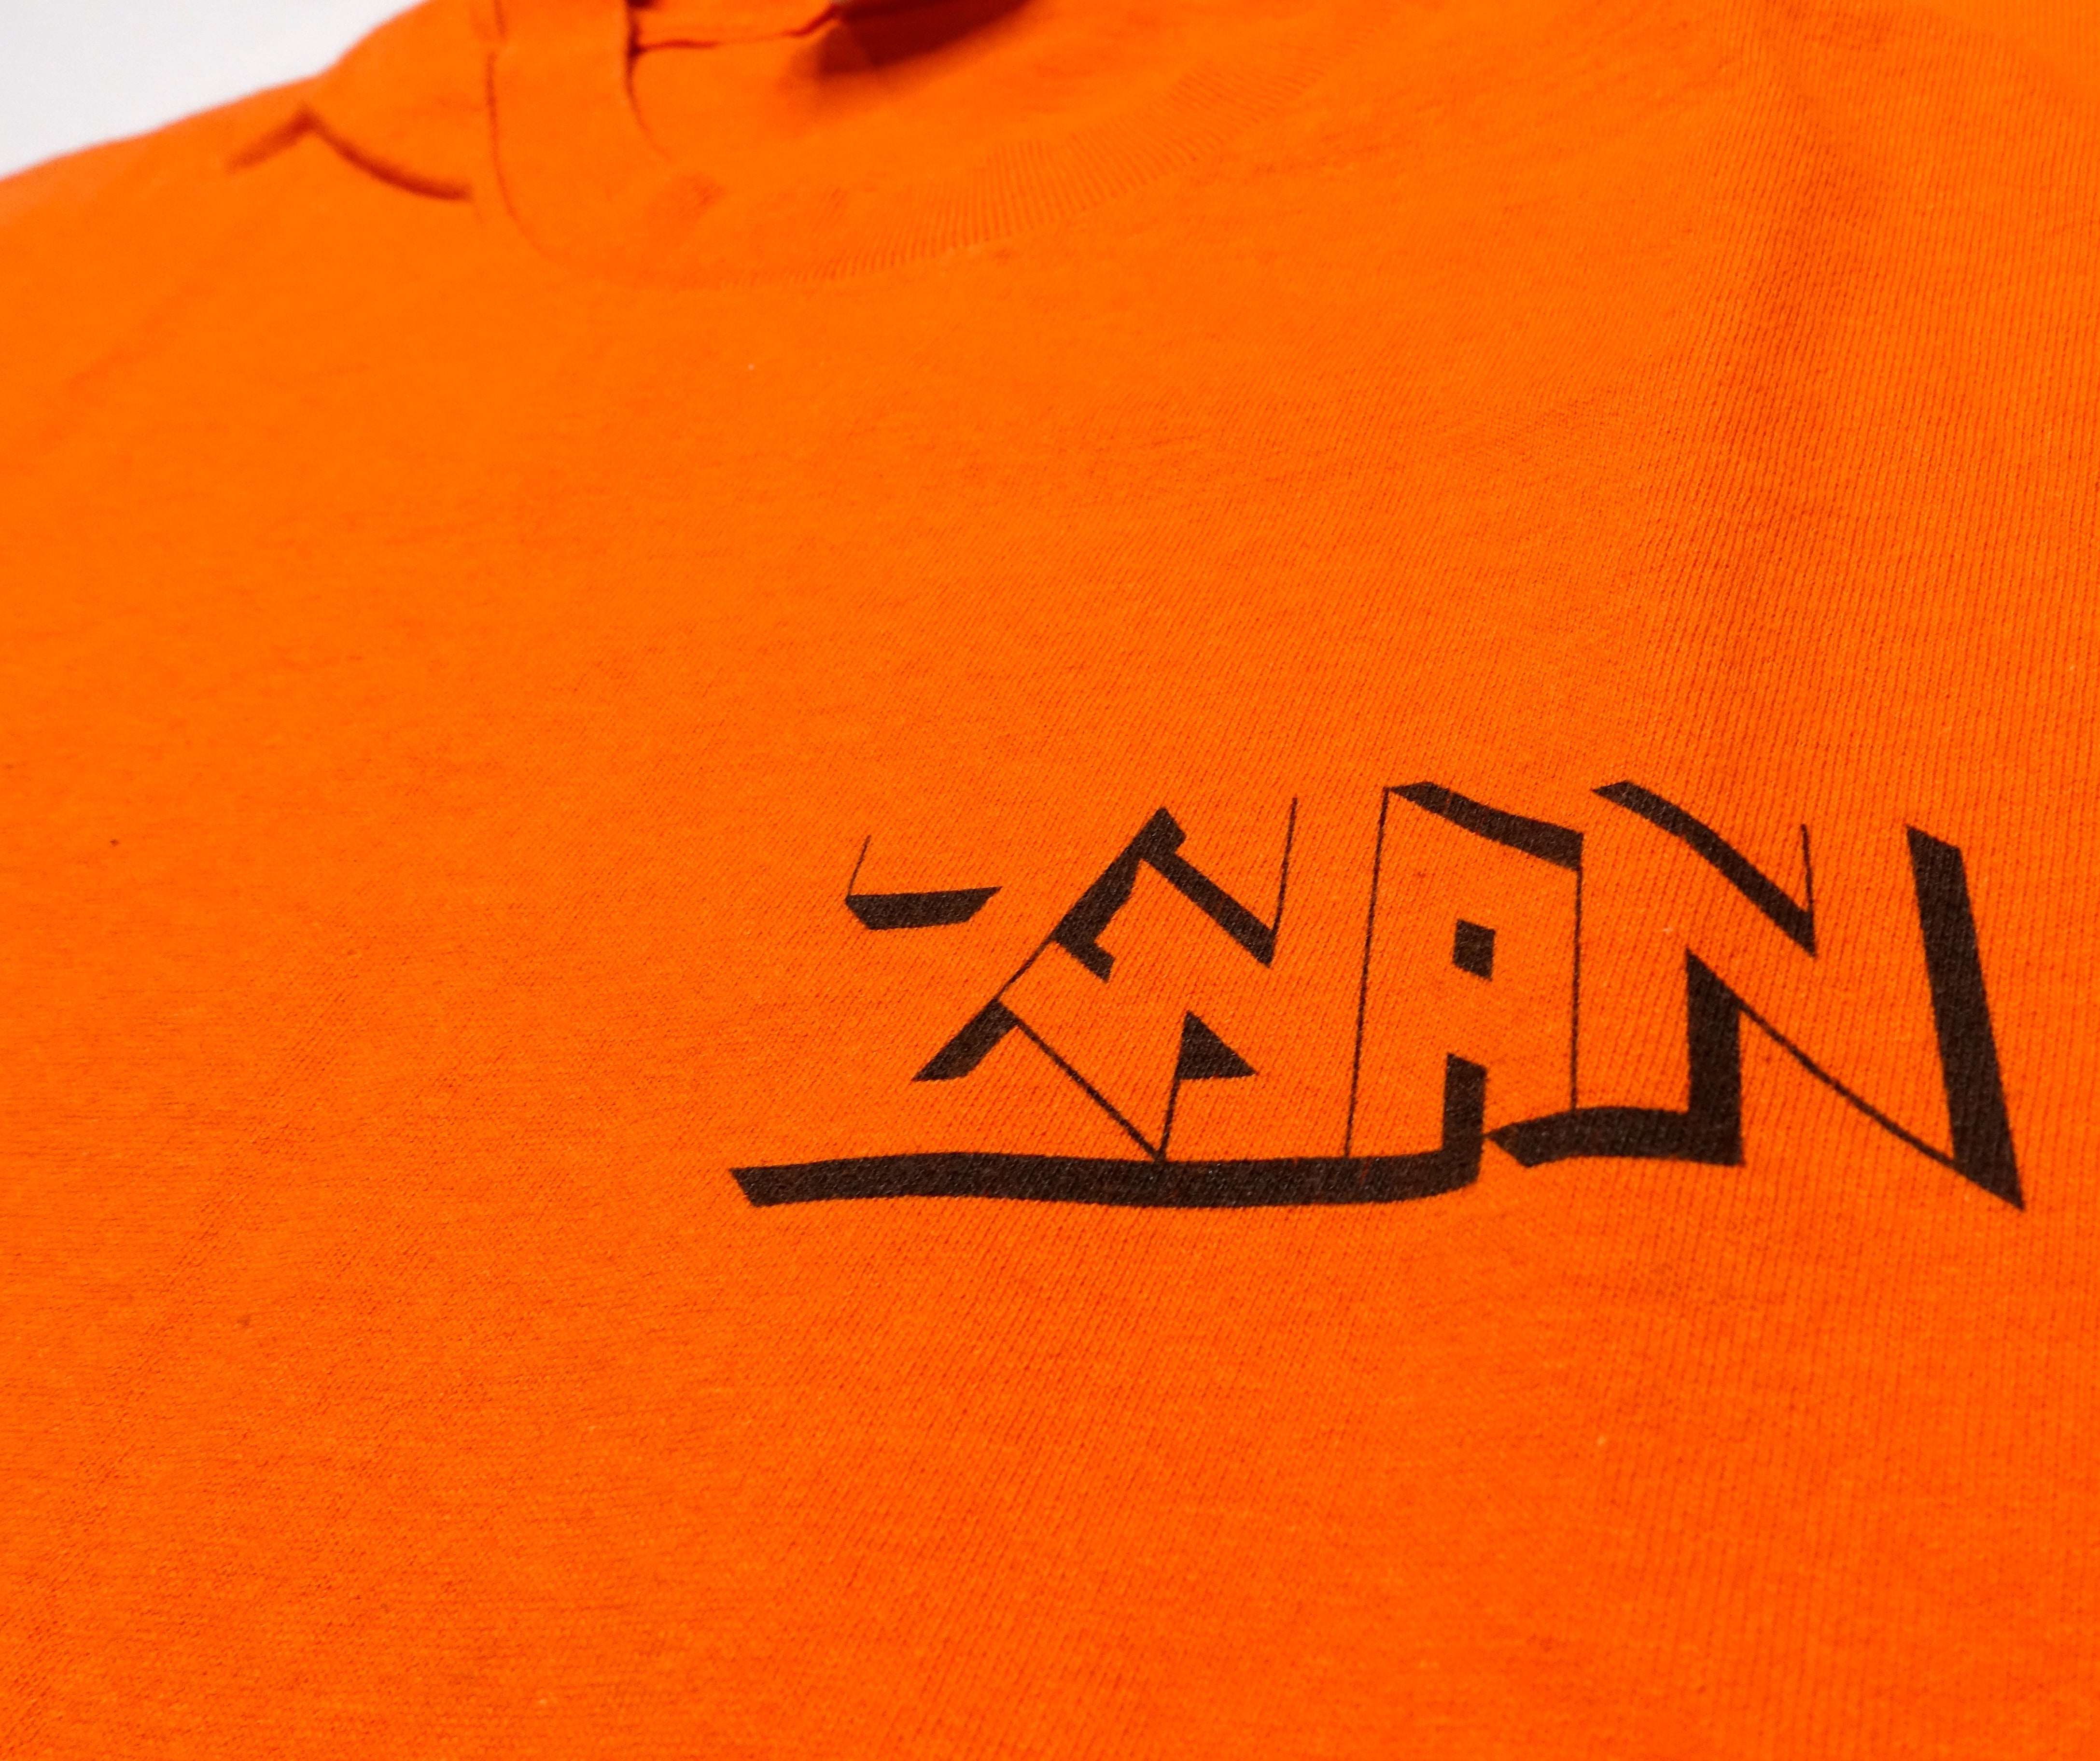 Zwan - They're Worth A Try! 2002 Tour (first show ever) Shirt Size XL